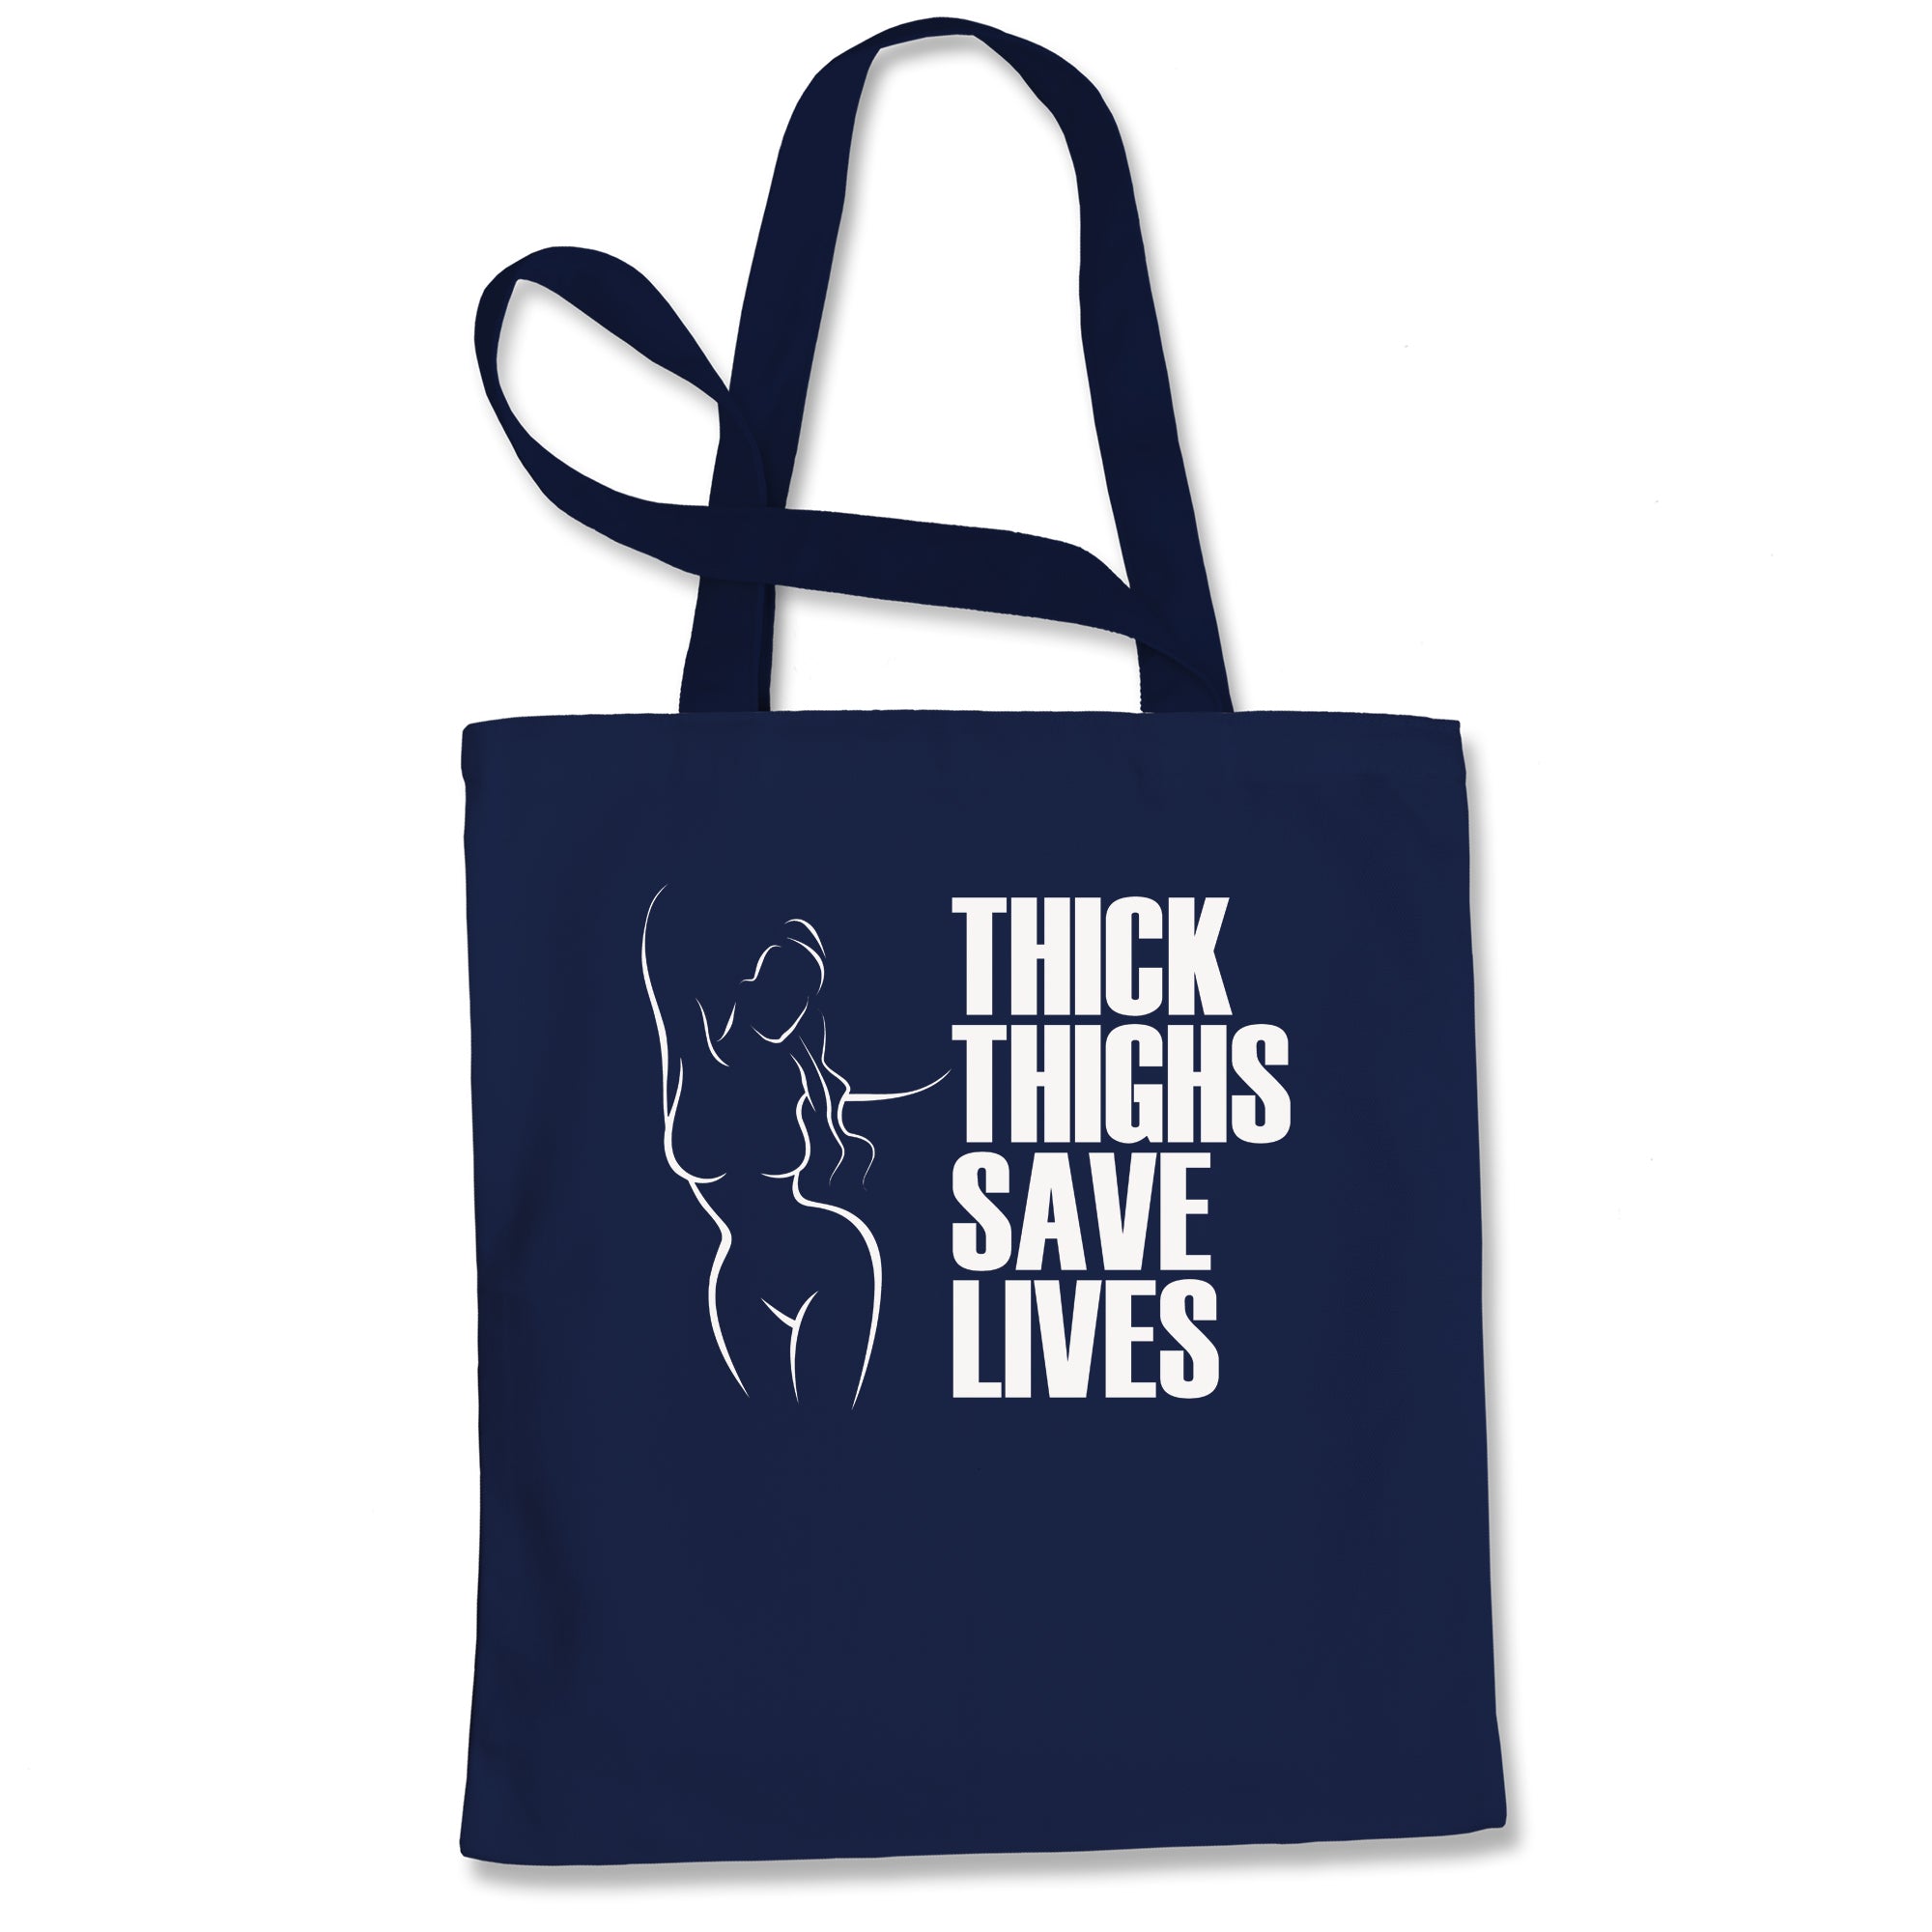 Thick Thighs Save Lives Tote Bag